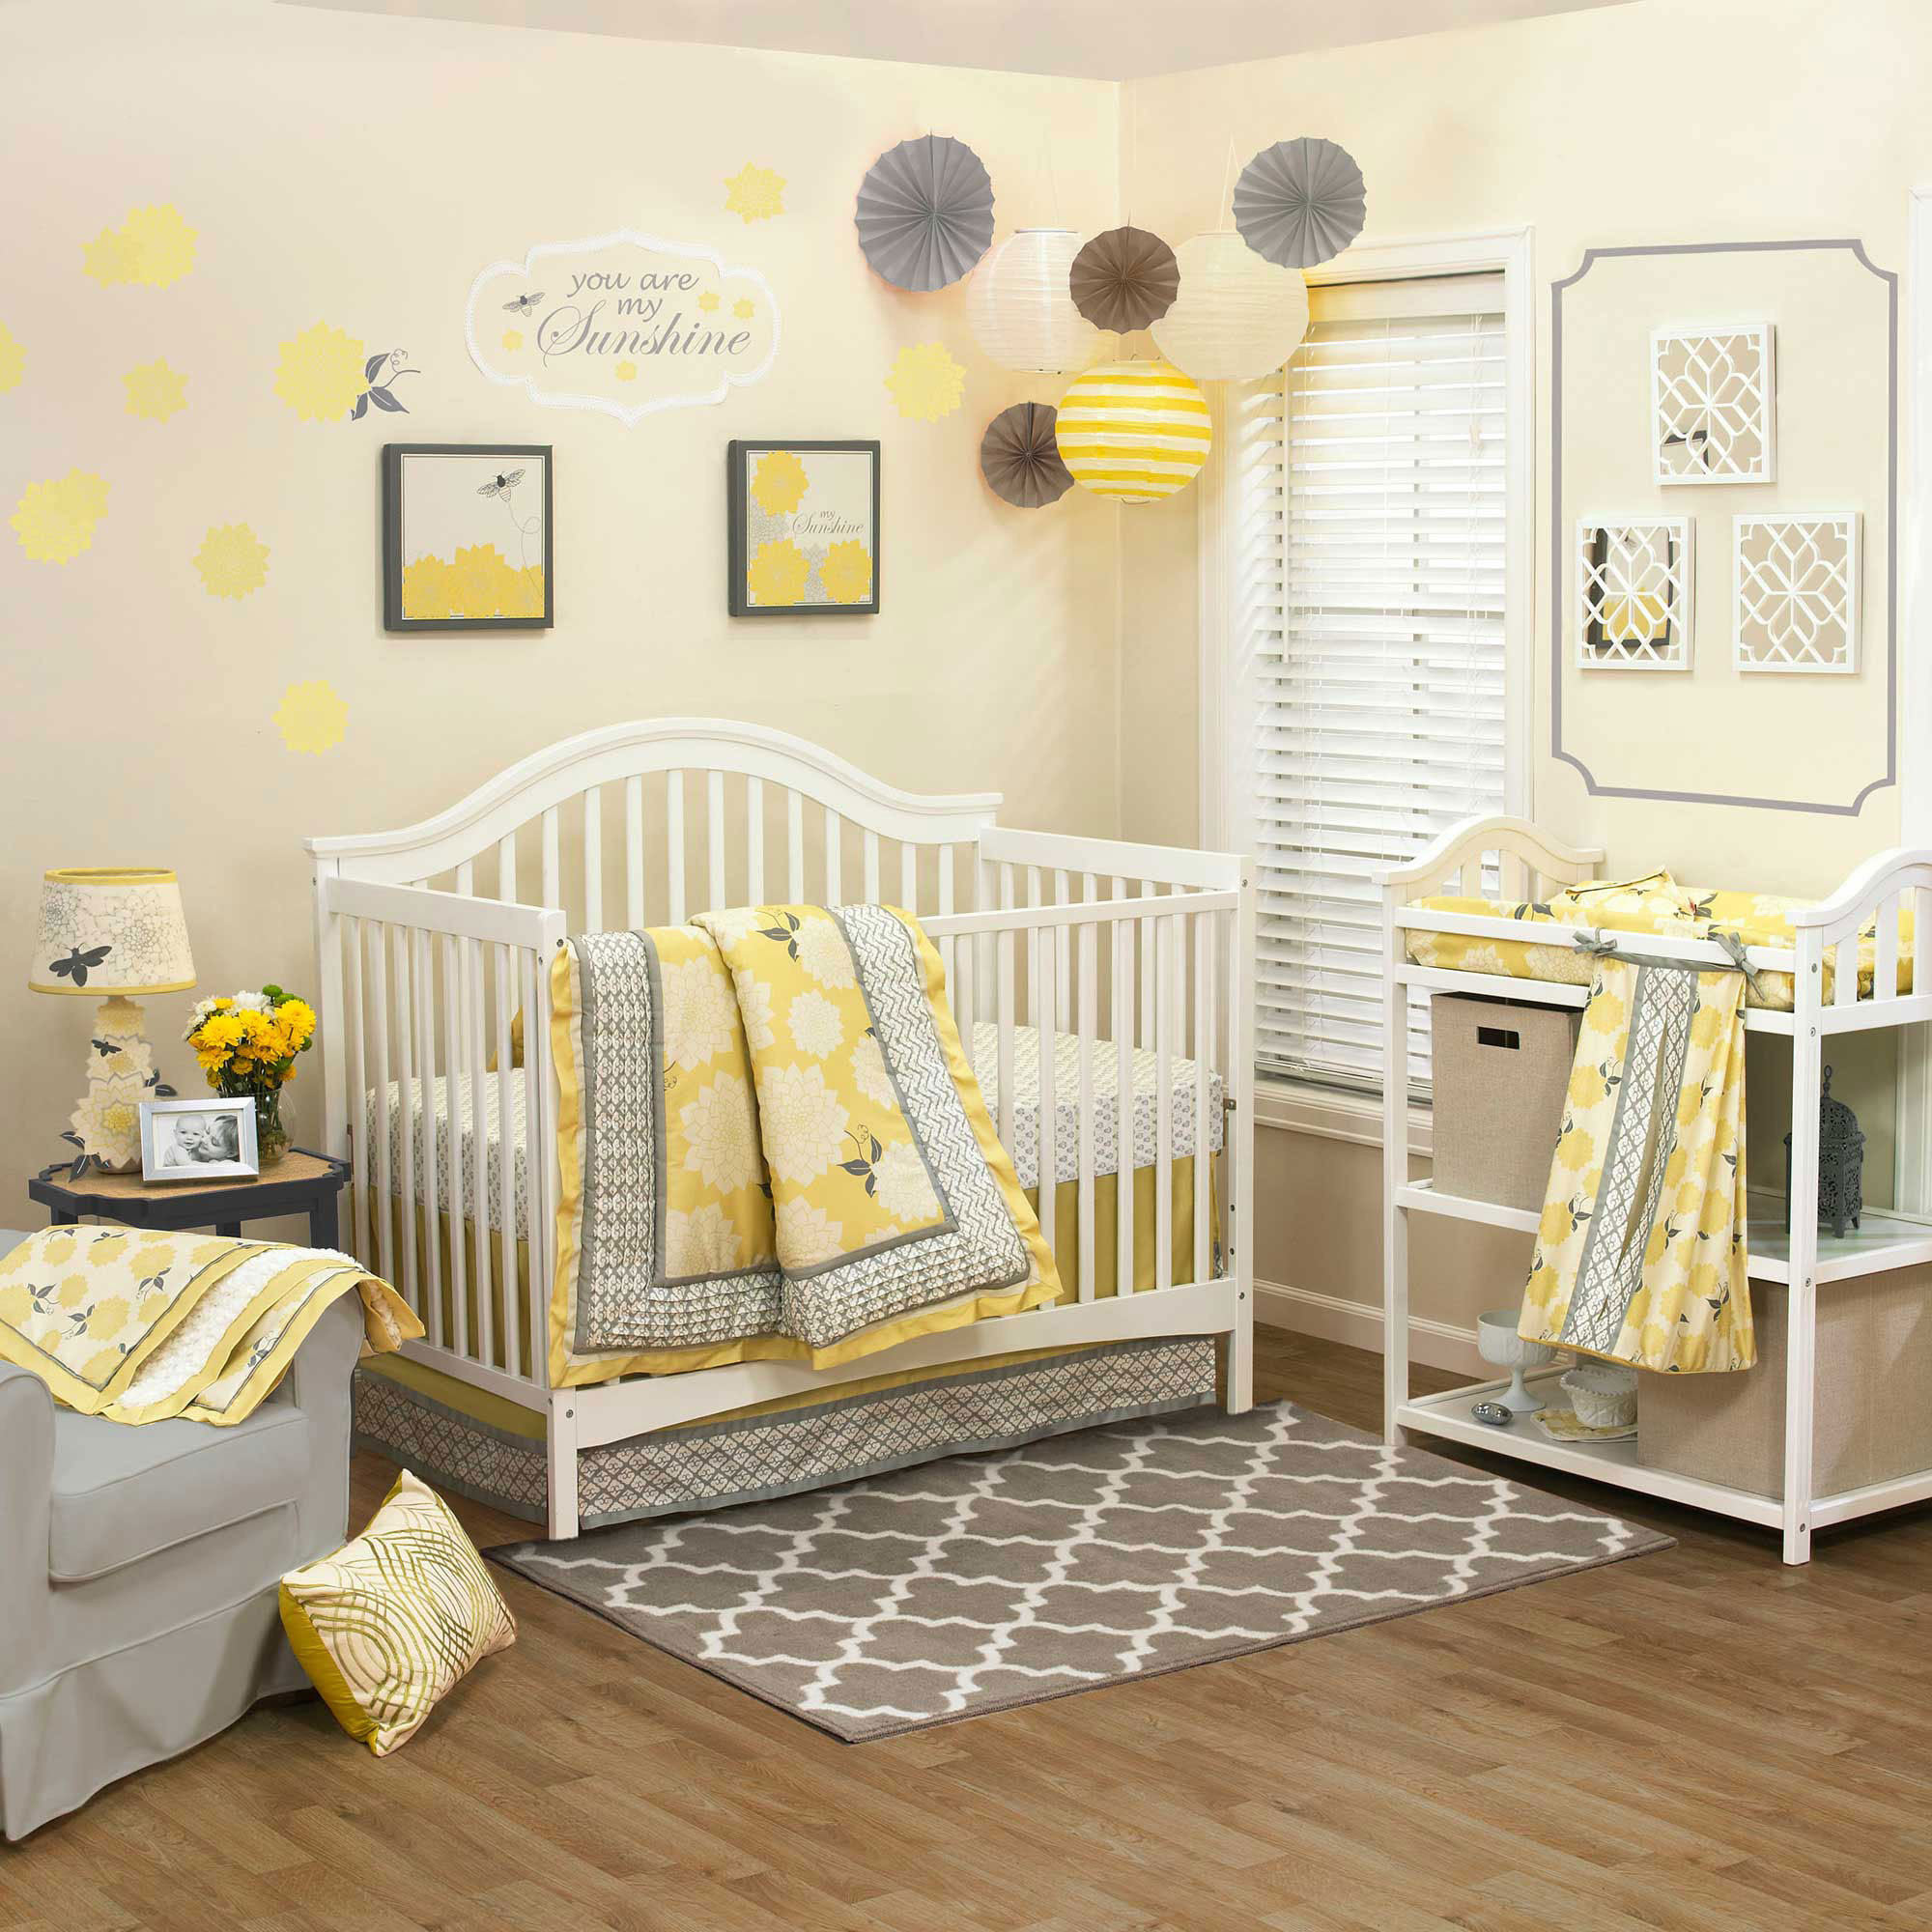 Decoration For Baby Room
 Baby Girl Nursery Ideas 10 Pretty Examples Decorating Room